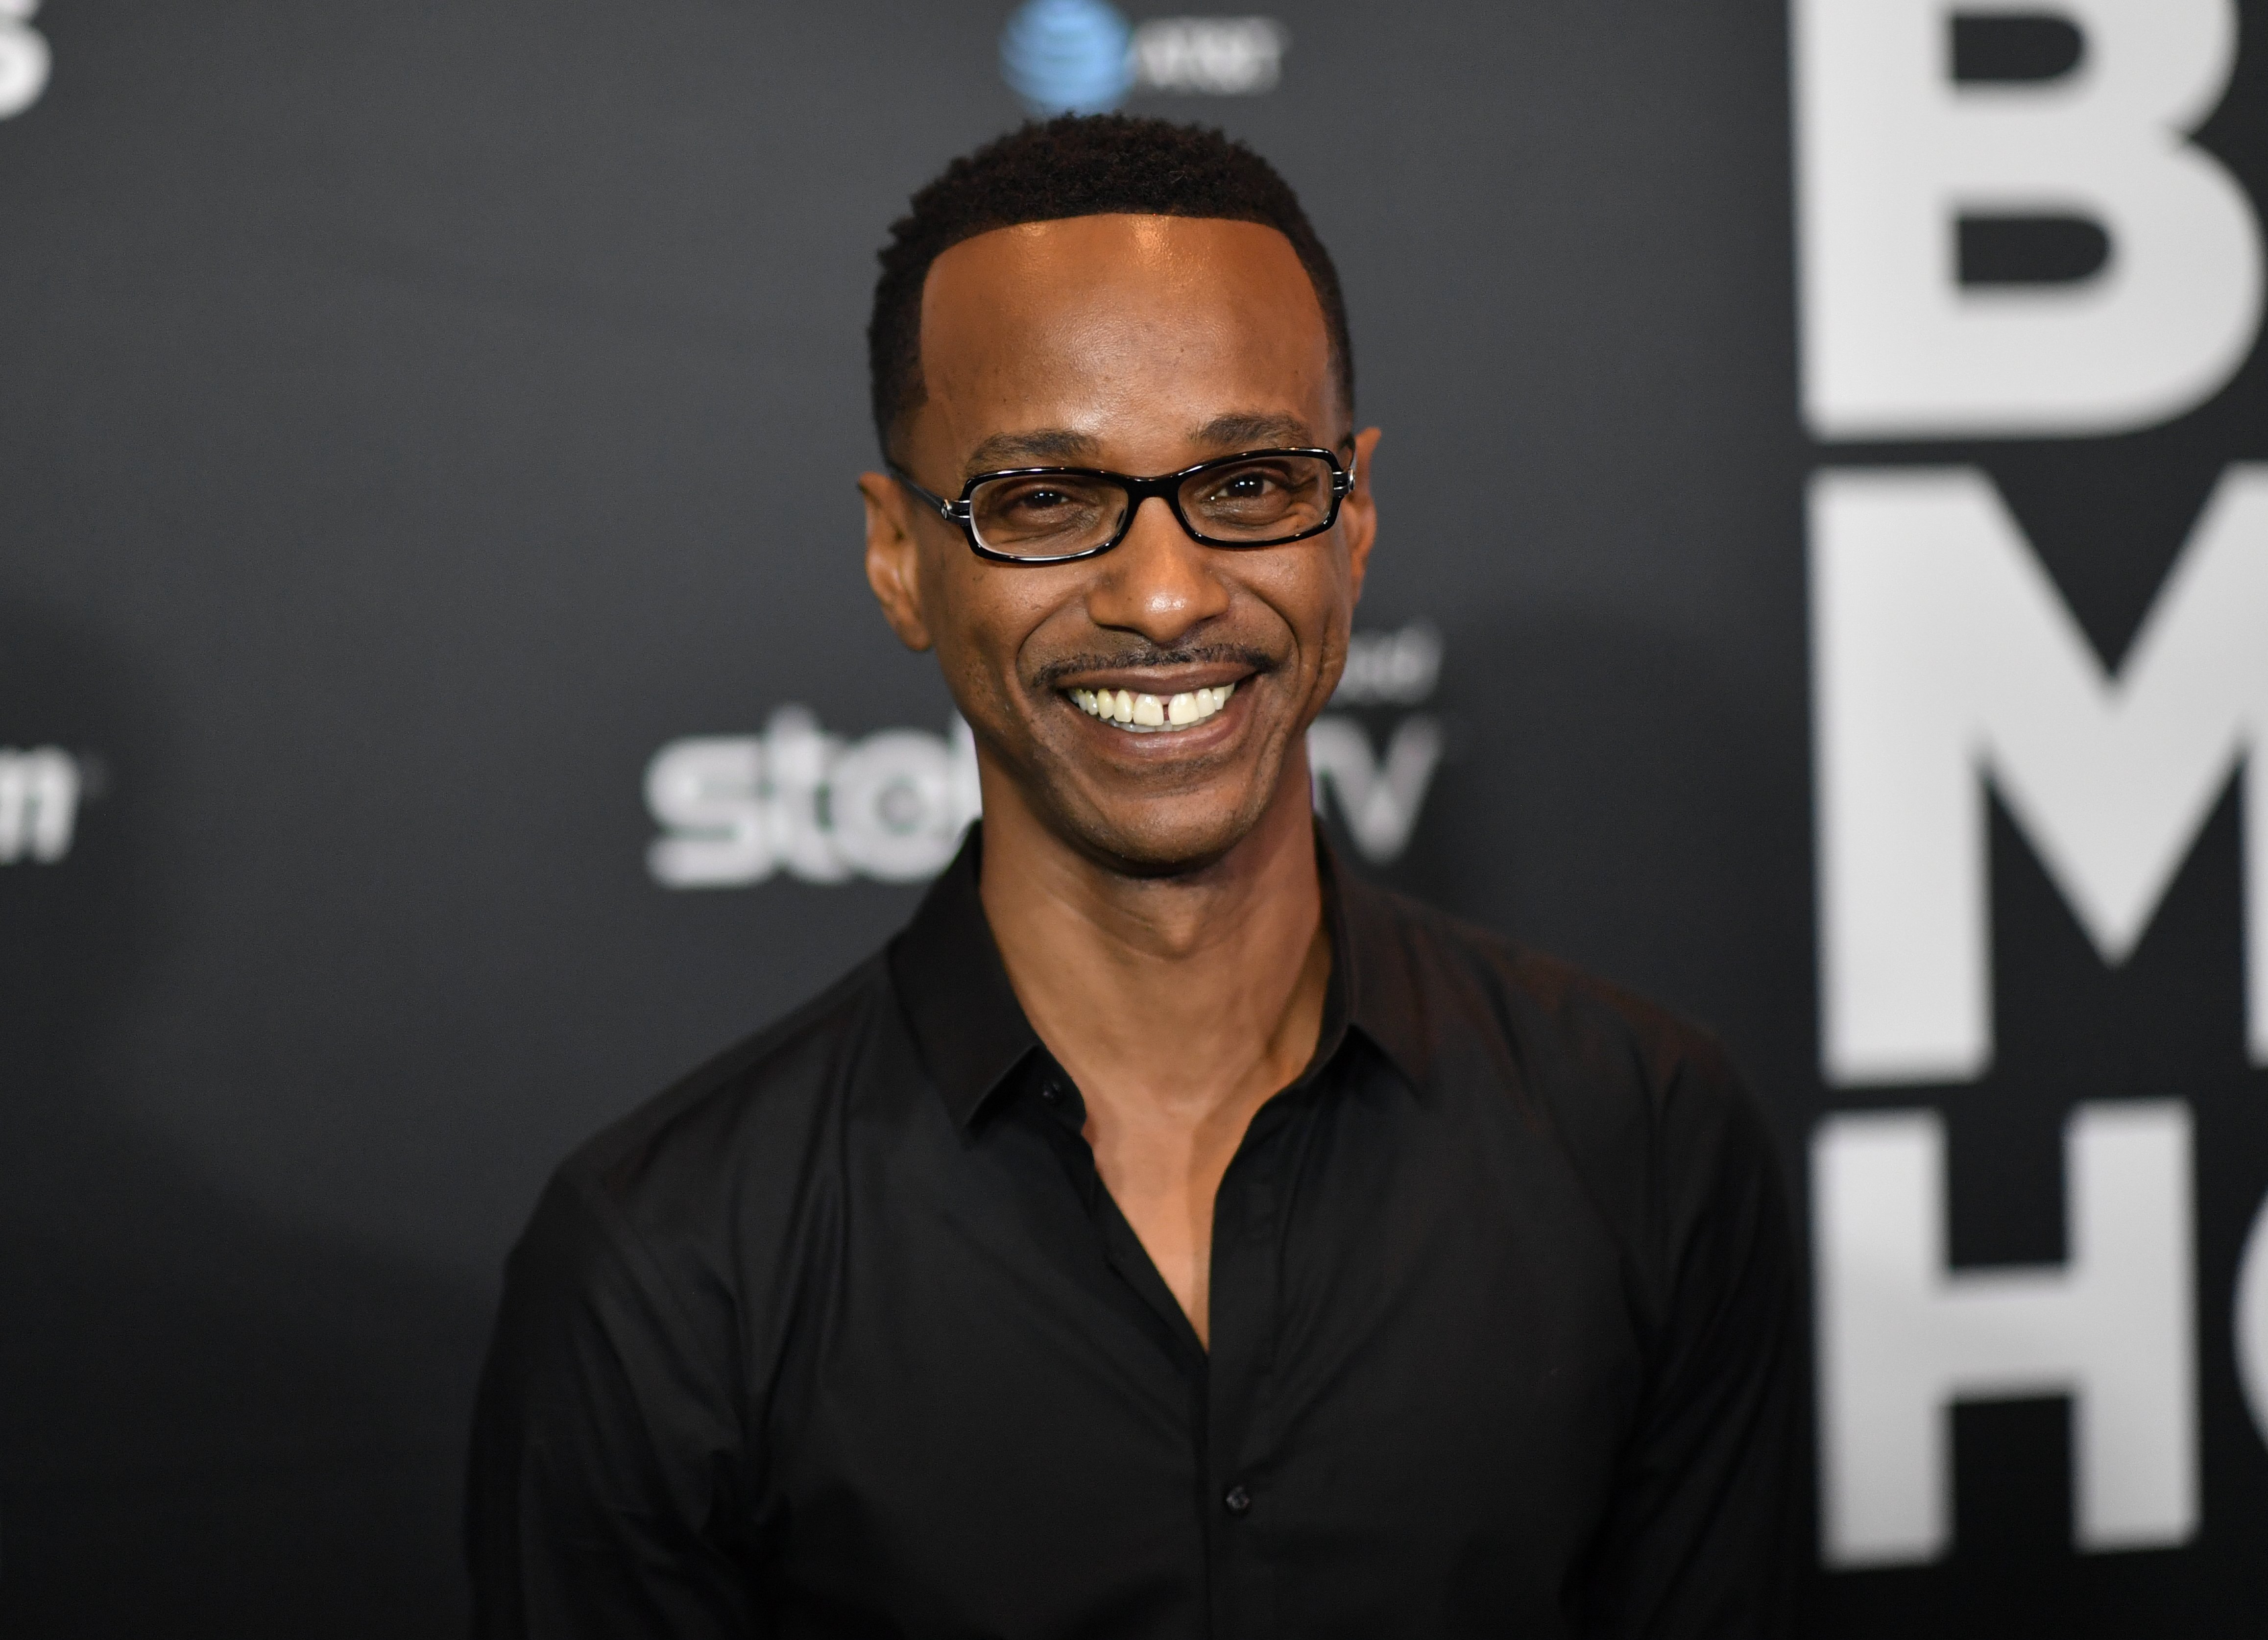 Tevin Campbell at the 2019 Annual Black Music Honors on September 5, 2019 | Source: Getty Images